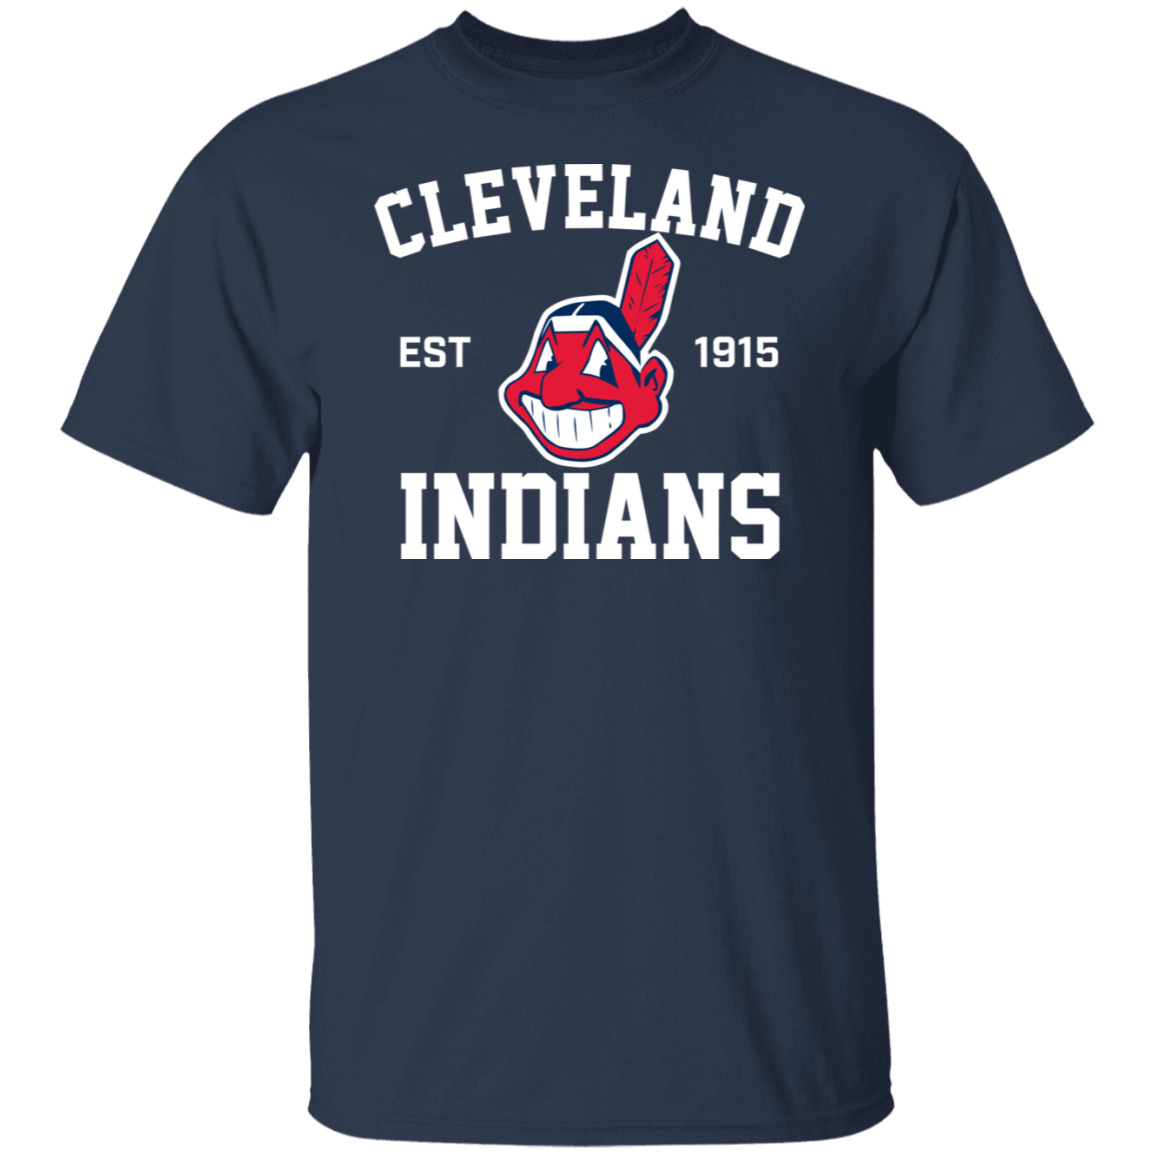 Men's Cleveland Indians Est 1915 Tee Shirt Chief Wahoo Forever Navy tShirt S-5XL